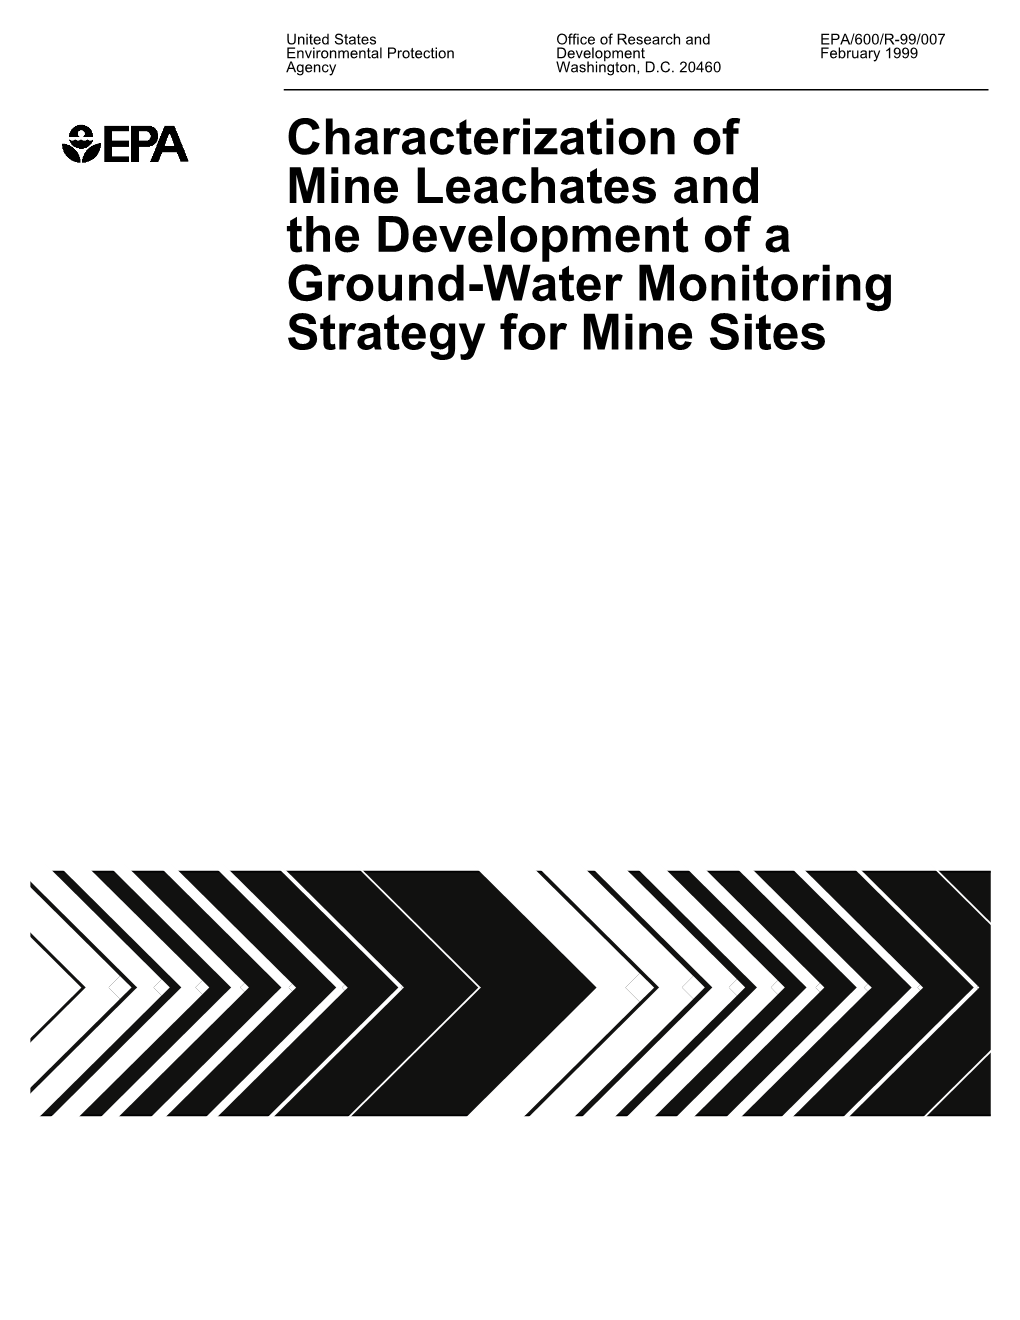 Characterization of Mine Leachates and the Development of a Ground-Water Monitoring Strategy for Mine Sites EPA/600/R-99/007 February 1999